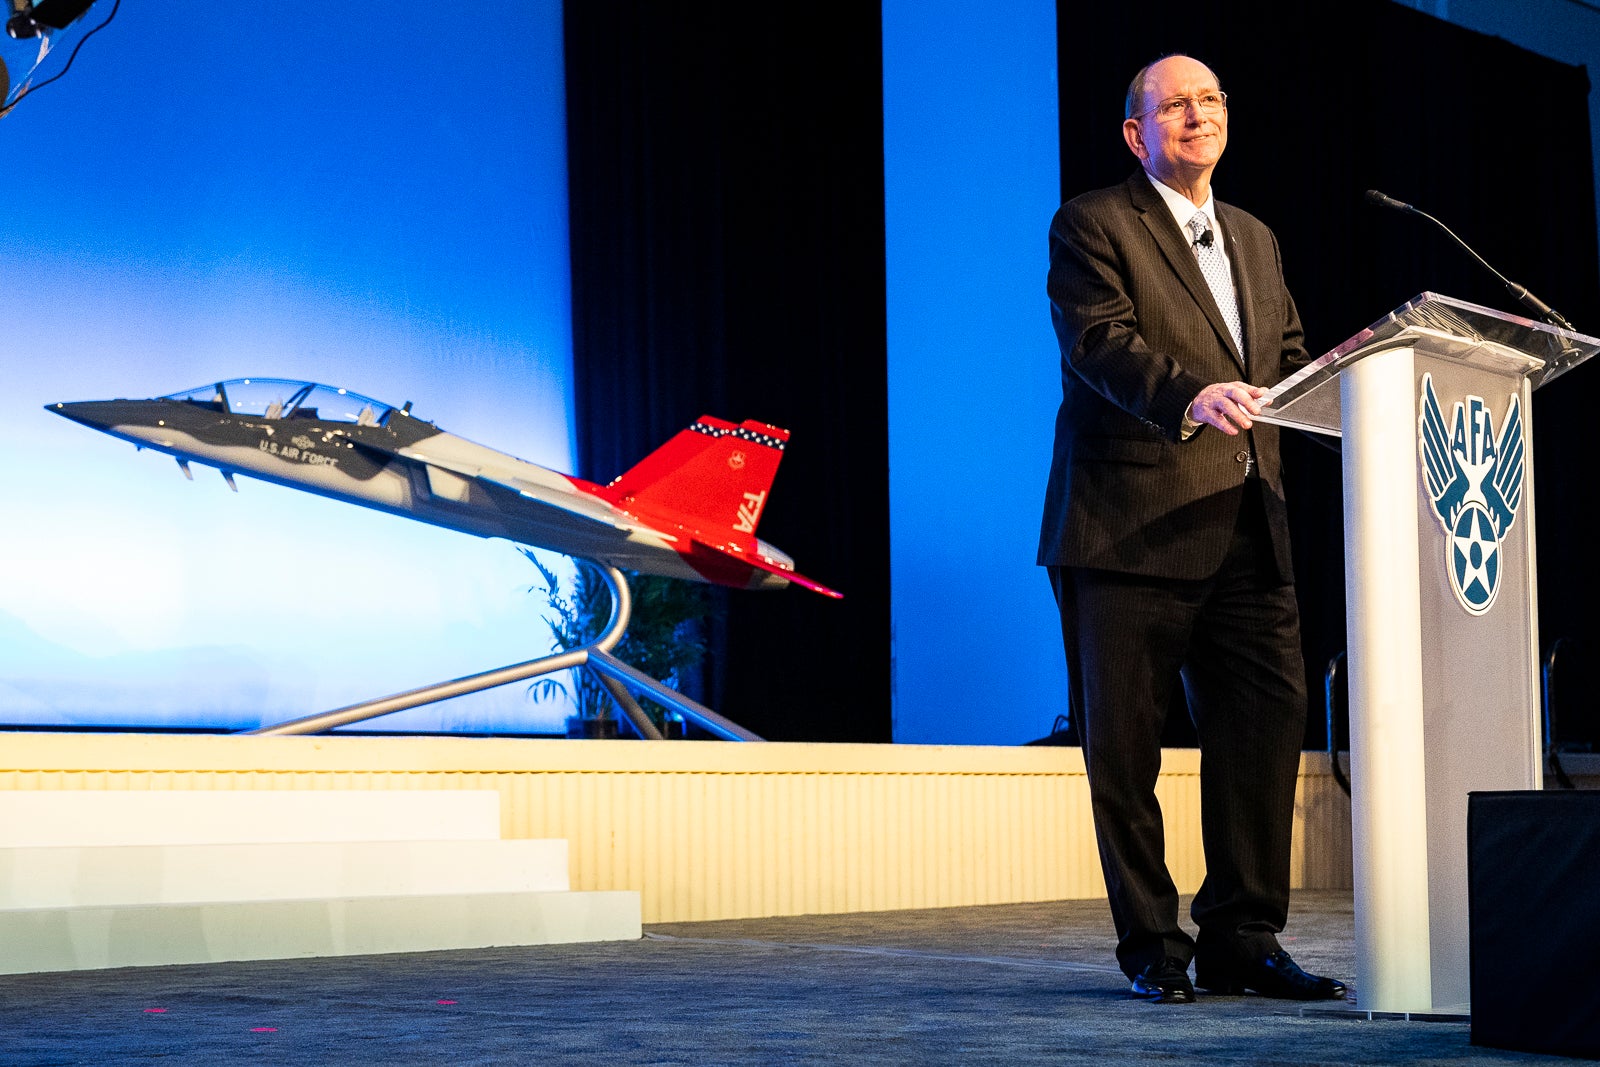 Acting Secretary of the Air Force Matthew P. Donovan reveals the name of the new Air Force trainer aircraft to be the T-7A Red Hawk during the Air Force Association Air, Space and Cyber Conference in National Harbor, Md., Sept. 16, 2019. From engaging speakers and panels focused on airpower, space, and cyber developments to the technology exposition featuring the latest technology, equipment, and solutions for tomorrow’s problems, the ASC has something for everyone. (U.S. Air Force photo by Tech. Sgt. D. Myles Cullen)